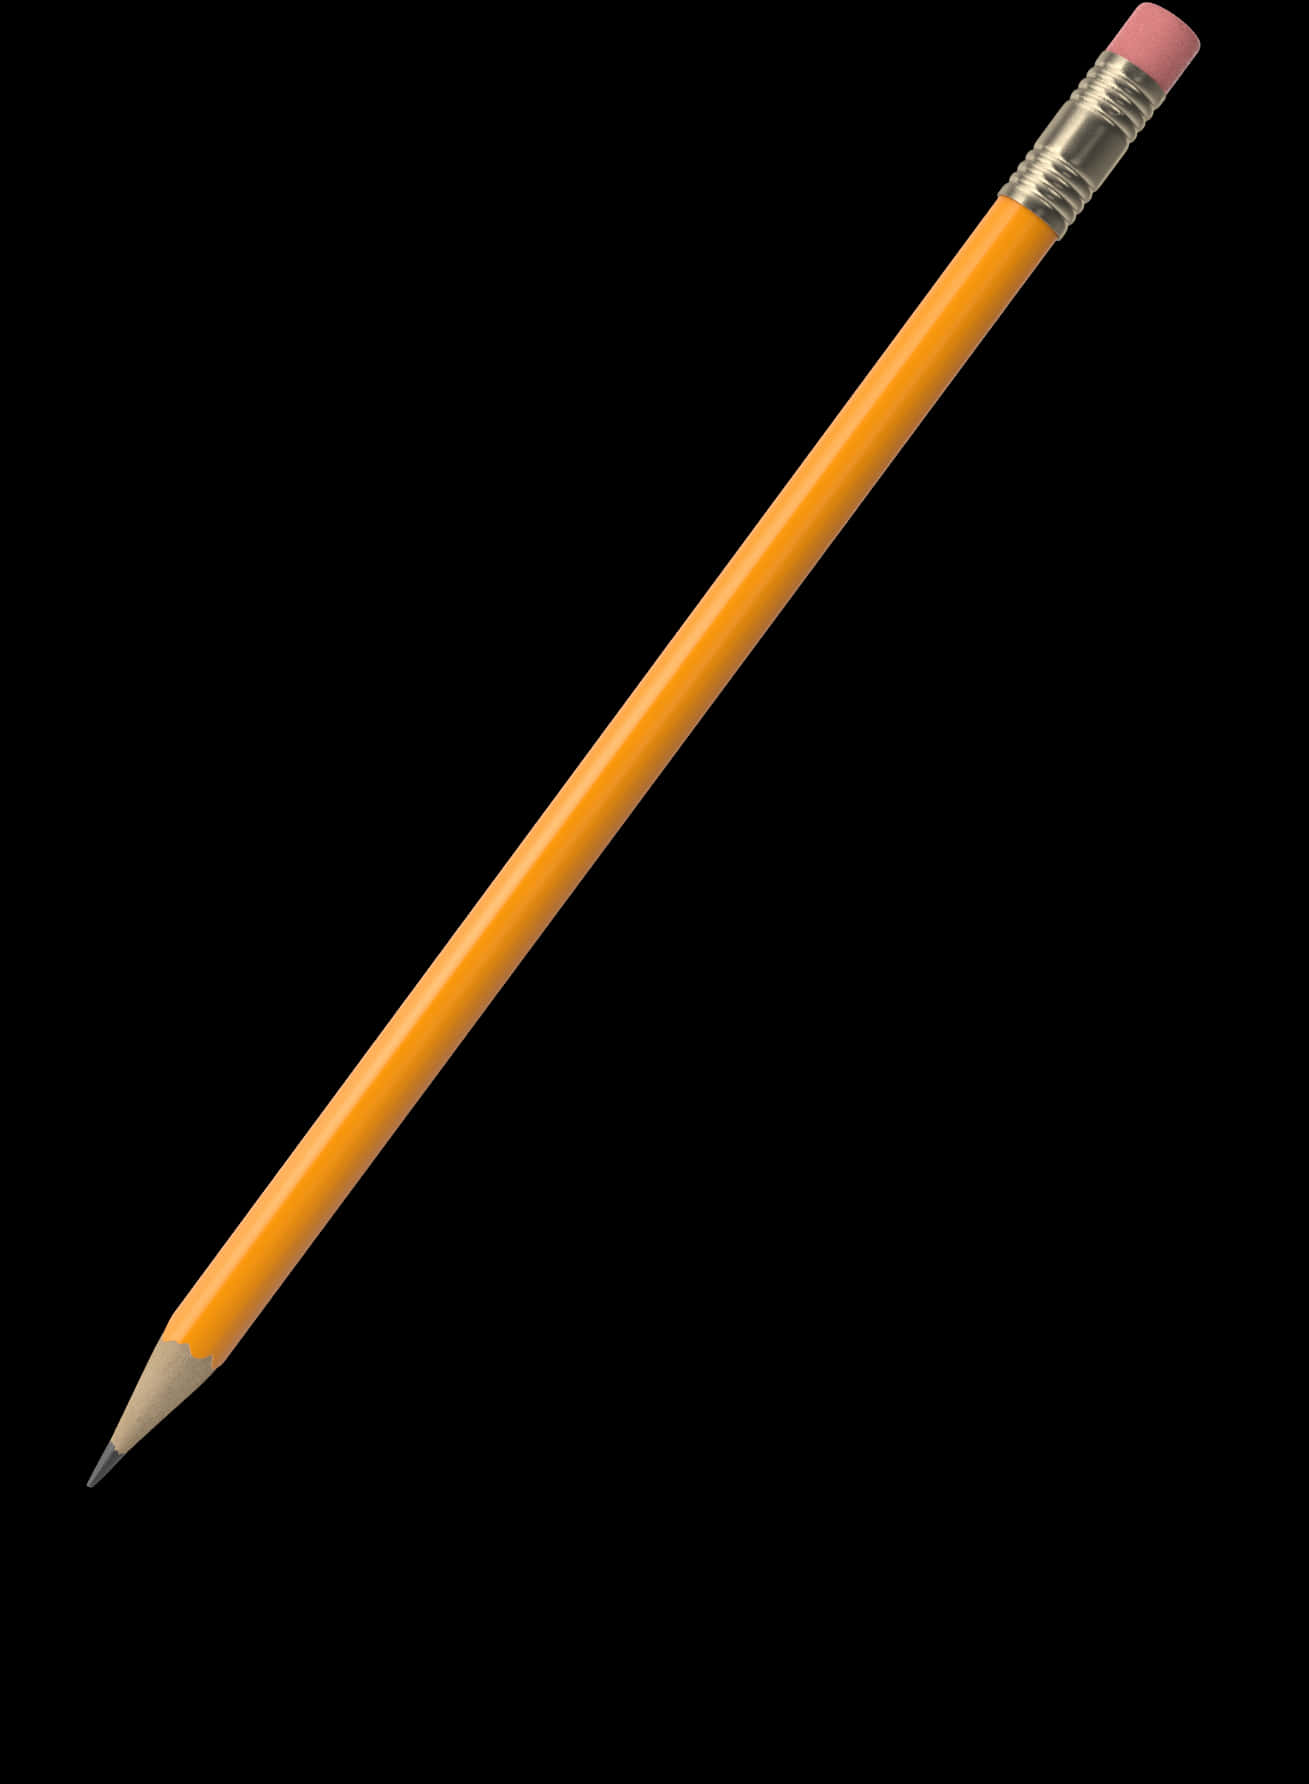 Classic Yellow Pencil Black Background.jpg PNG